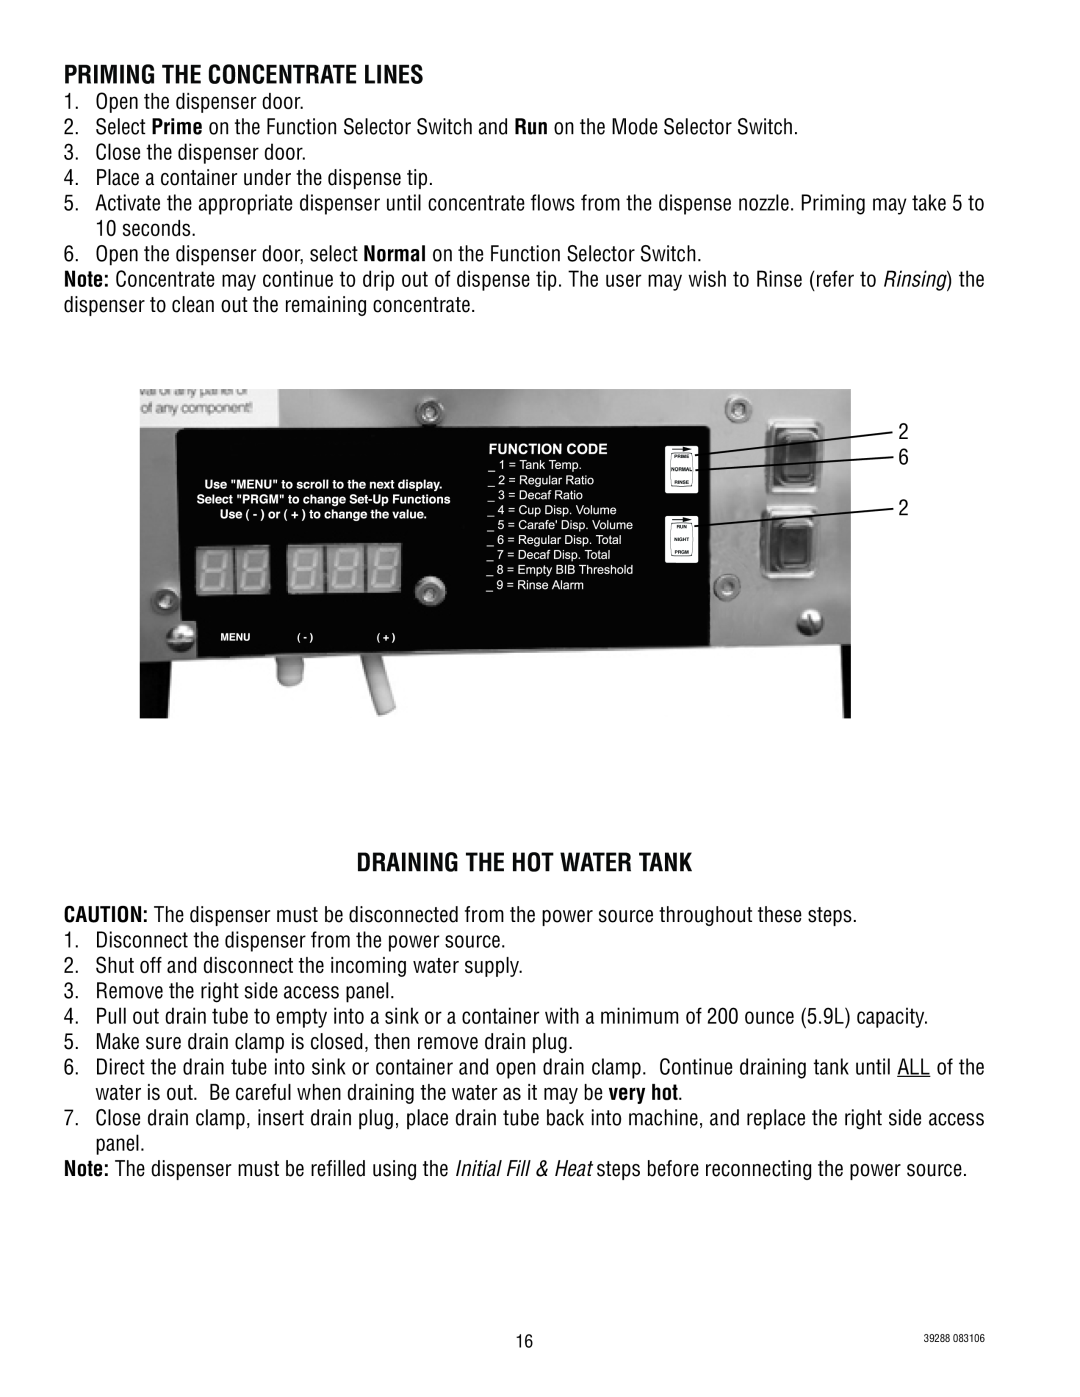 Bunn LCC-2 service manual Priming The Concentrate Lines, Draining The Hot Water Tank 